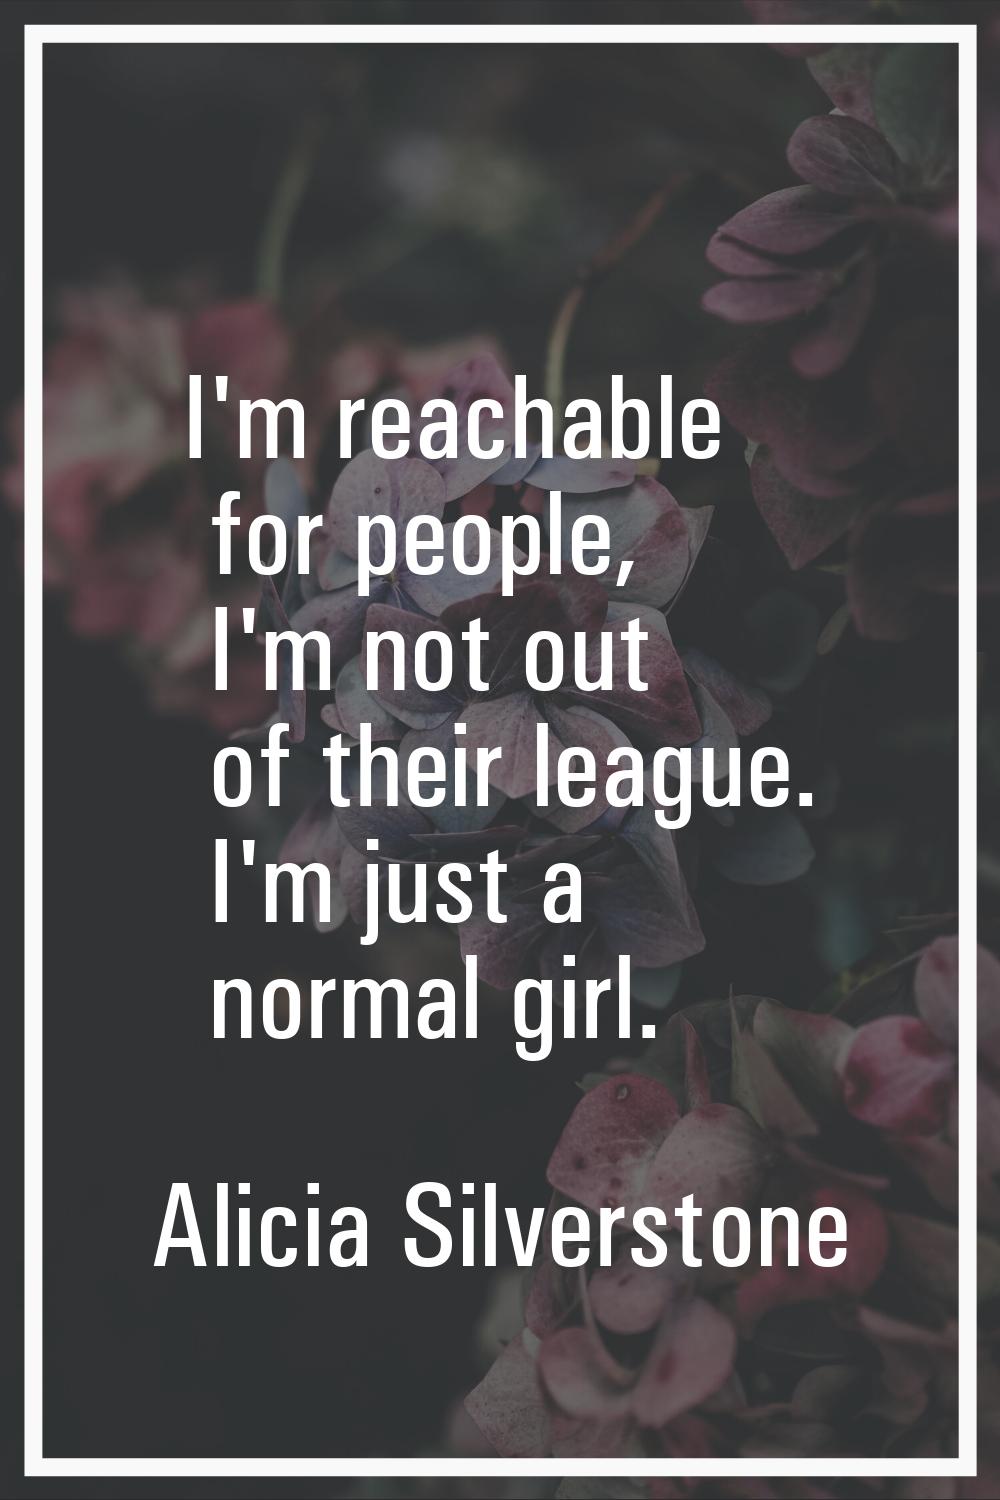 I'm reachable for people, I'm not out of their league. I'm just a normal girl.